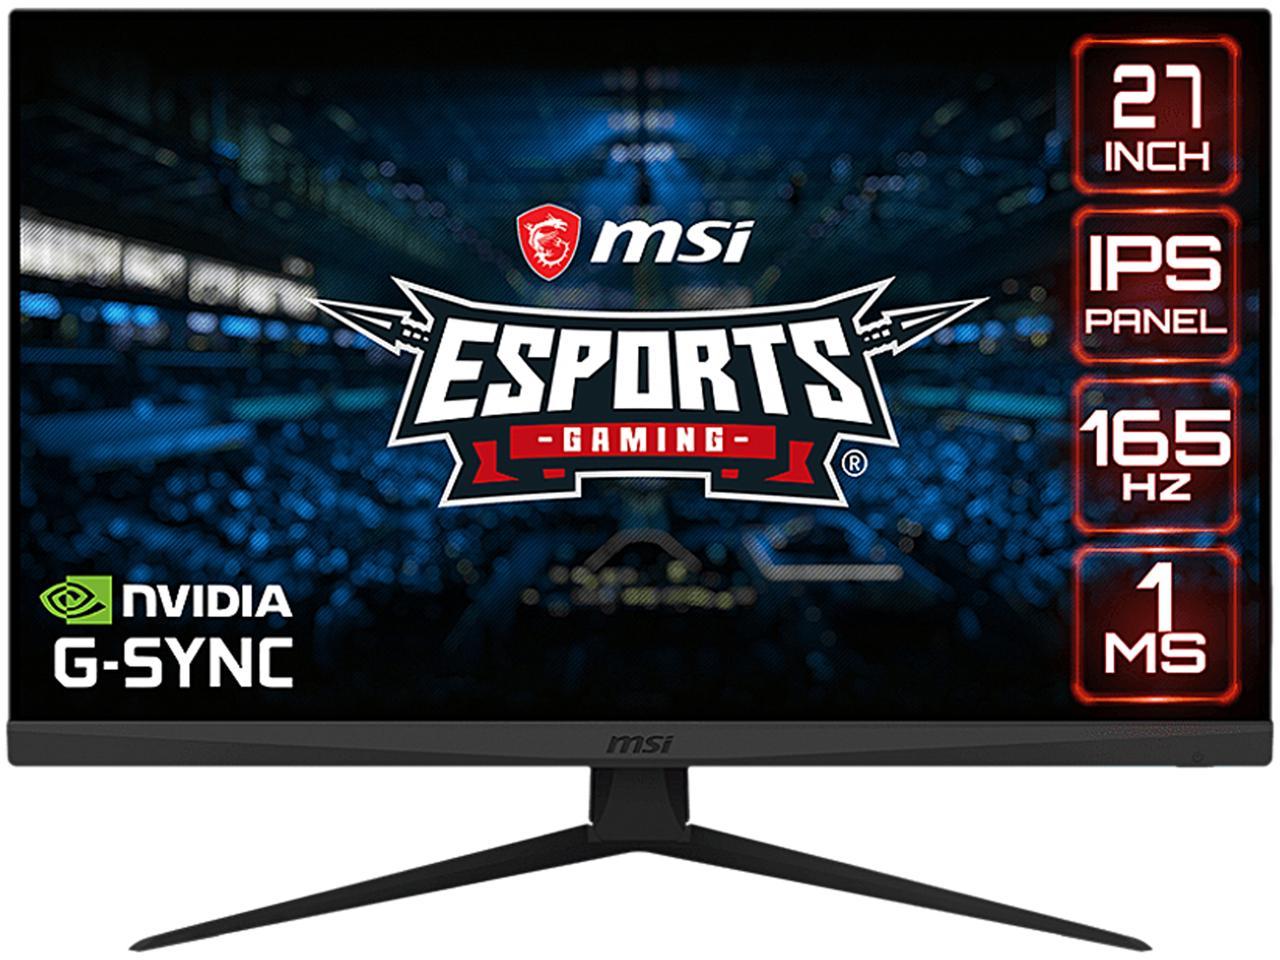 MSI 27" 165 Hz IPS FHD Gaming Monitor G-Sync Compatible 1920 x 1080 $119.99 shipped